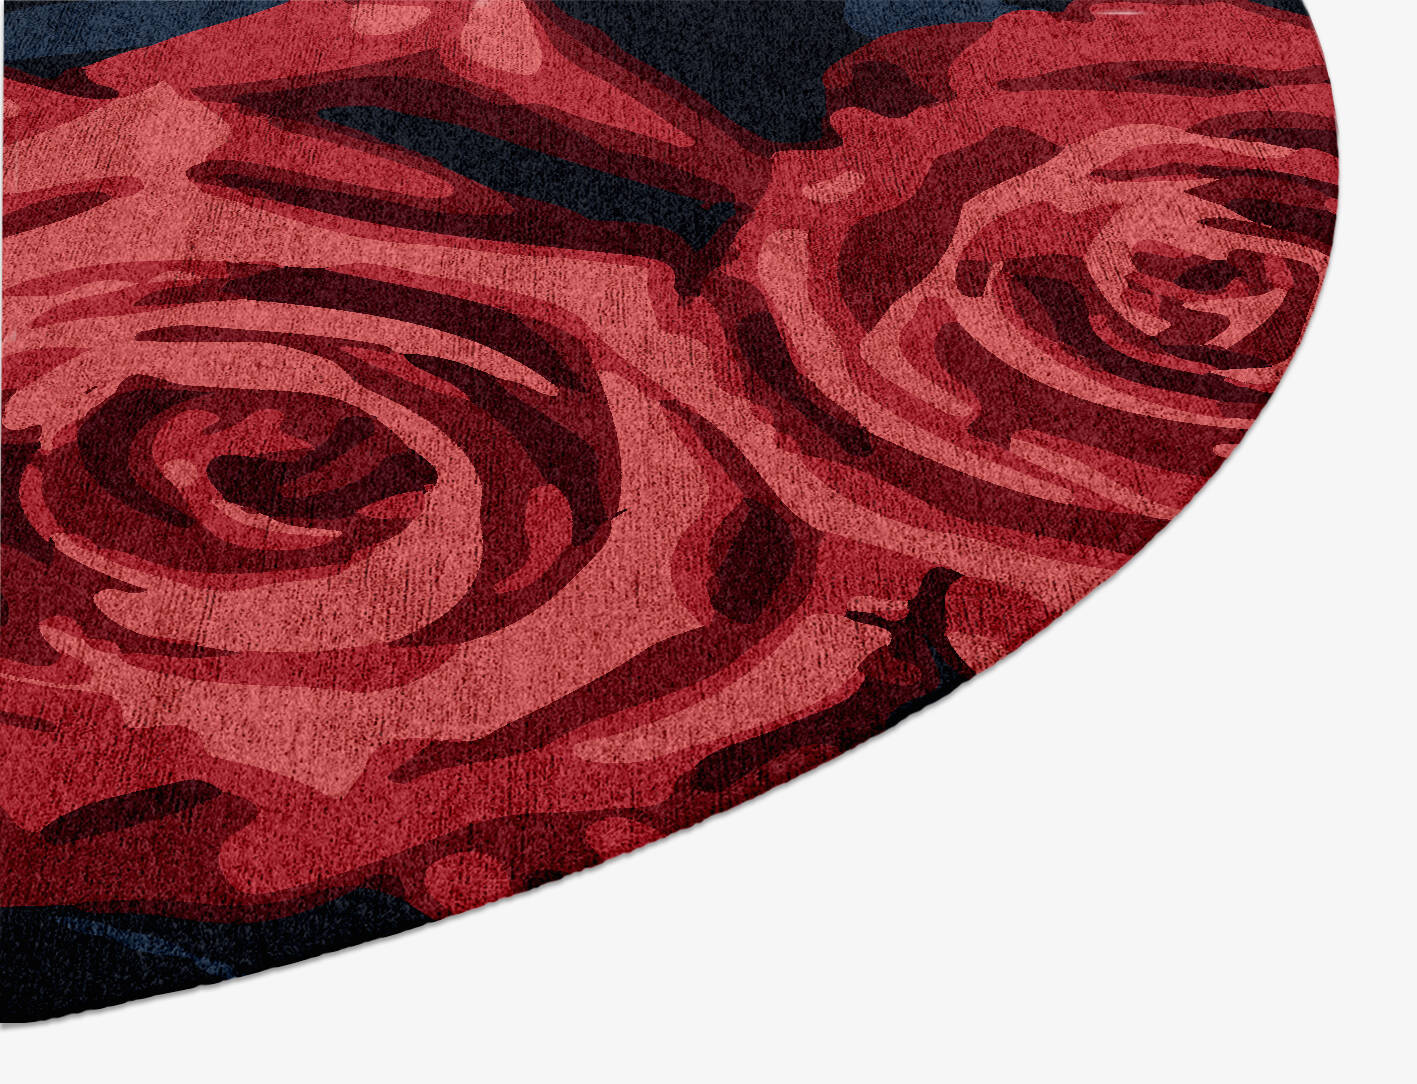 Roses Floral Oval Hand Knotted Bamboo Silk Custom Rug by Rug Artisan